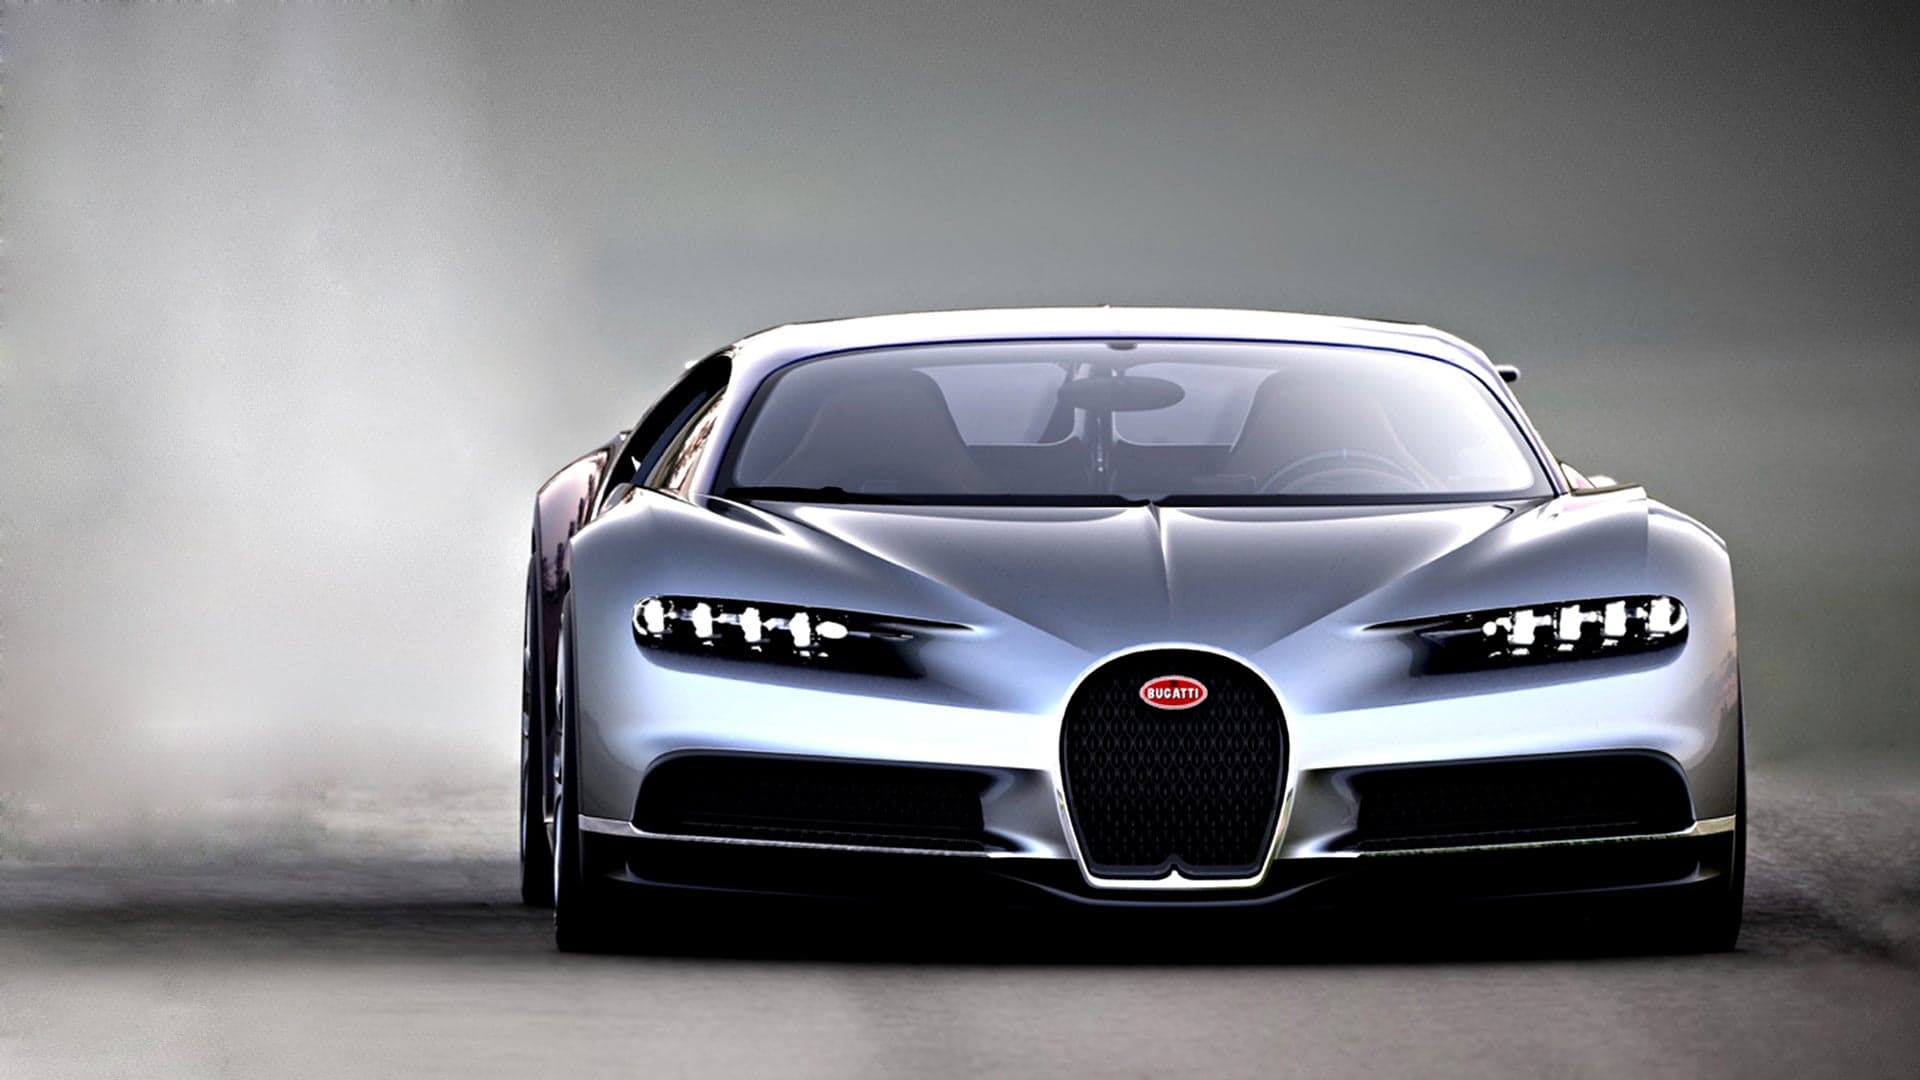 This Is How You Buy a $3M Bugatti Hypercar